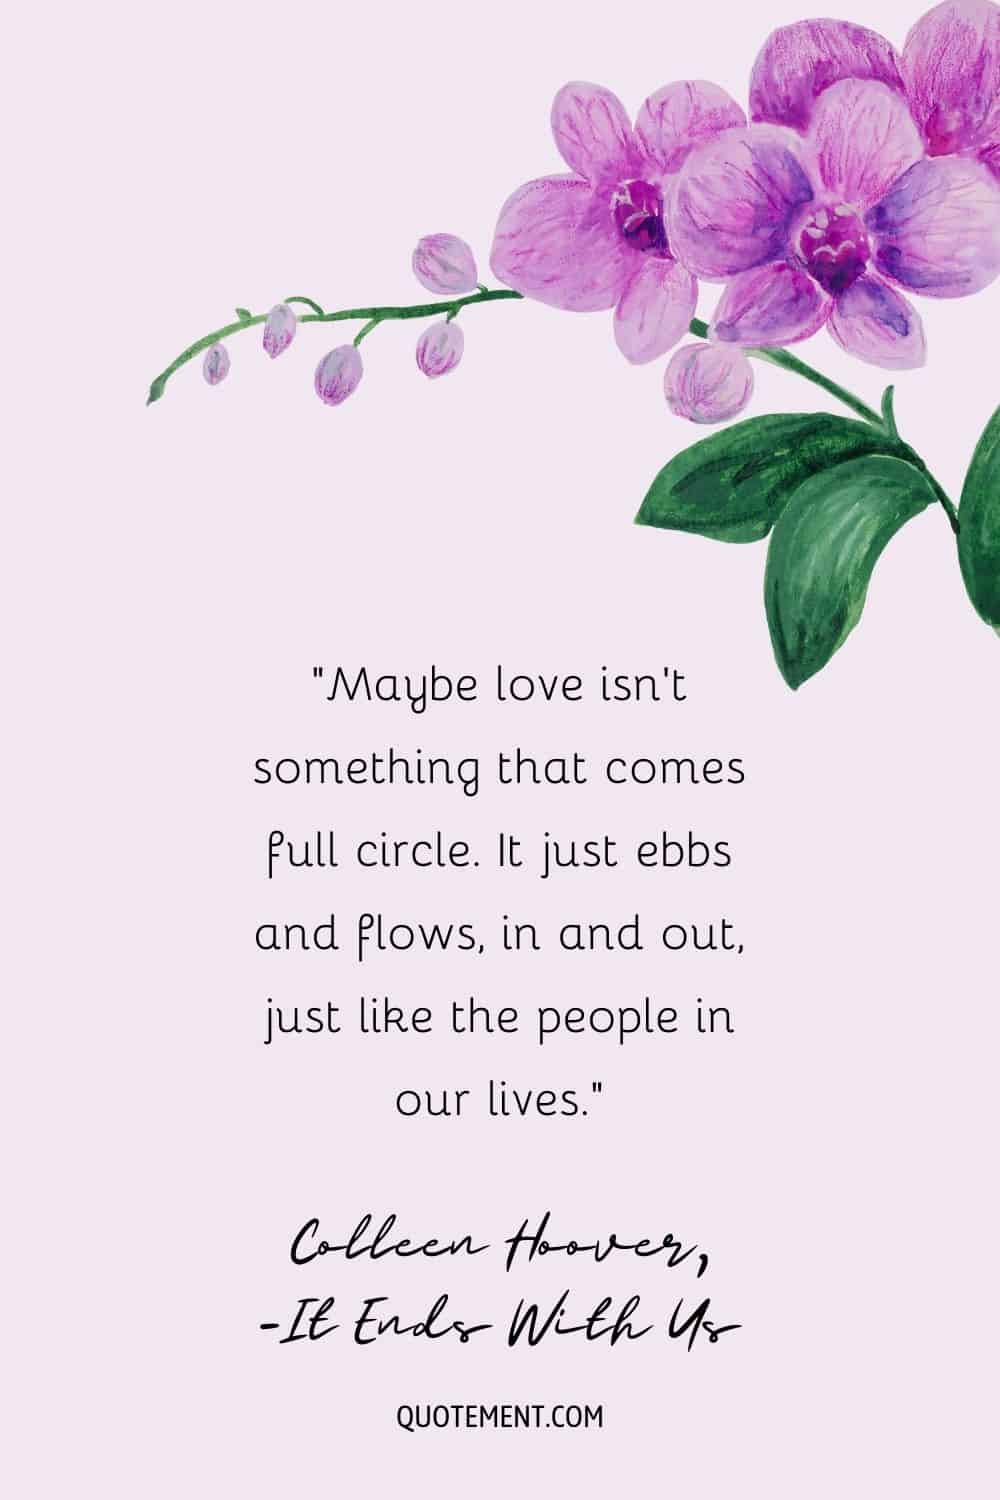 Love quote by Colleen Hoover represented by pink flowers illustration.
